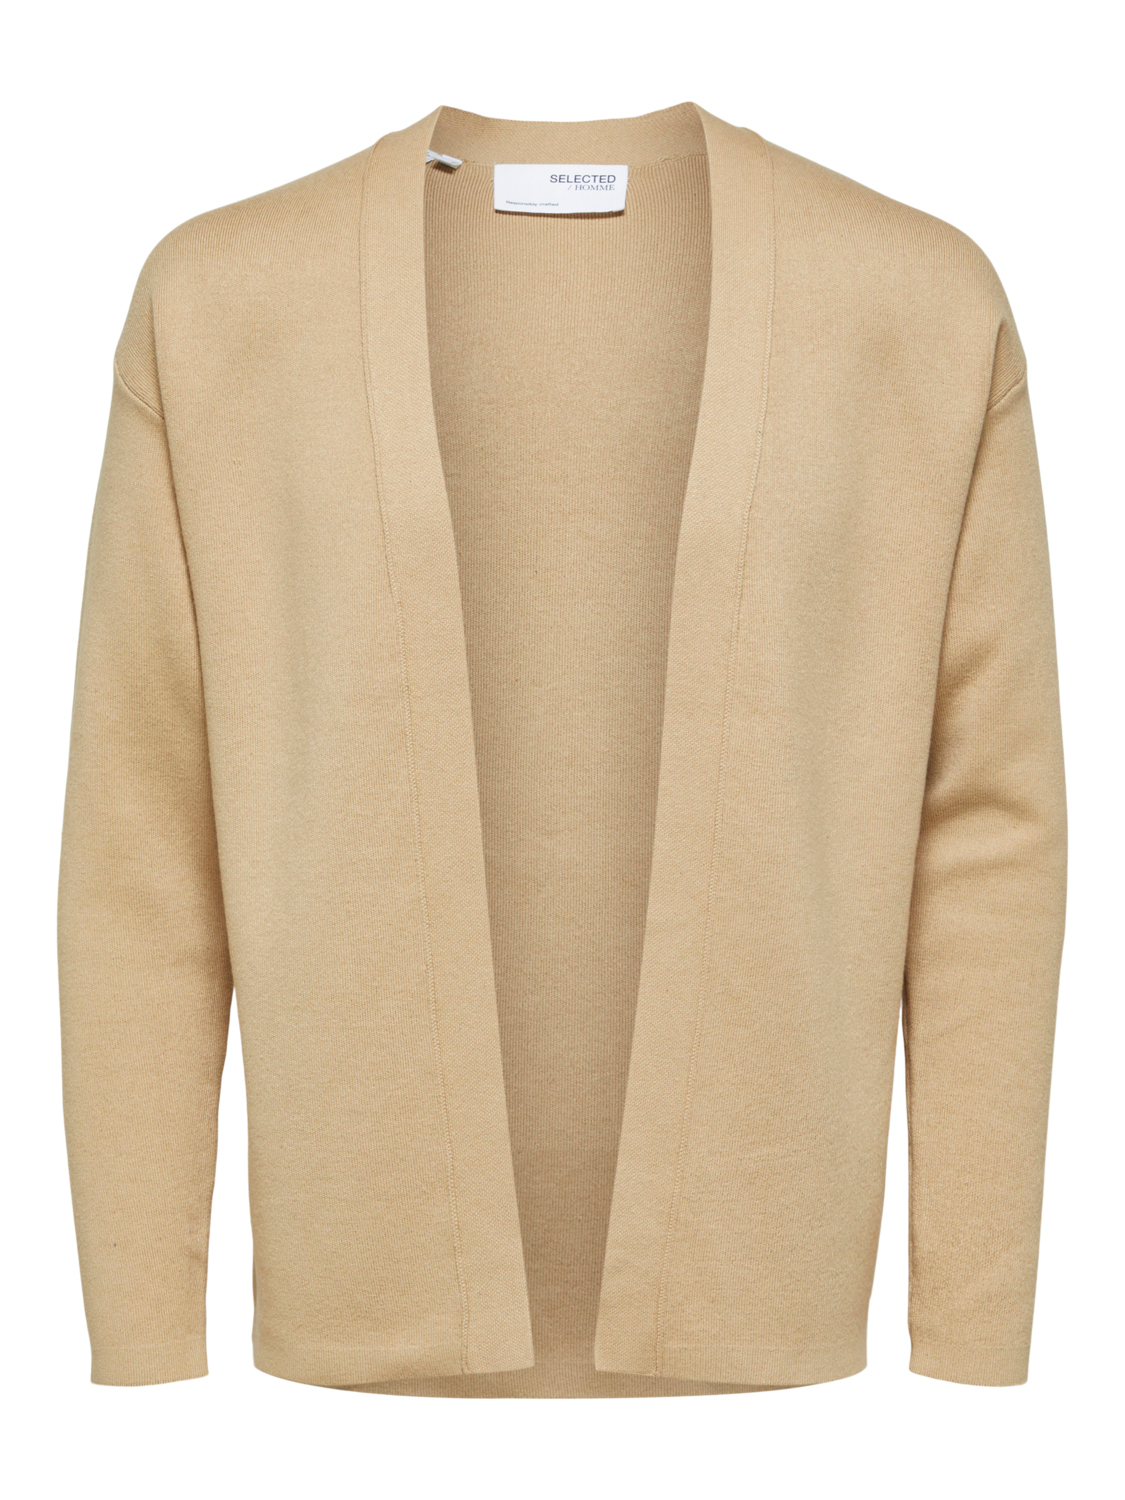 cardigan selected rodger